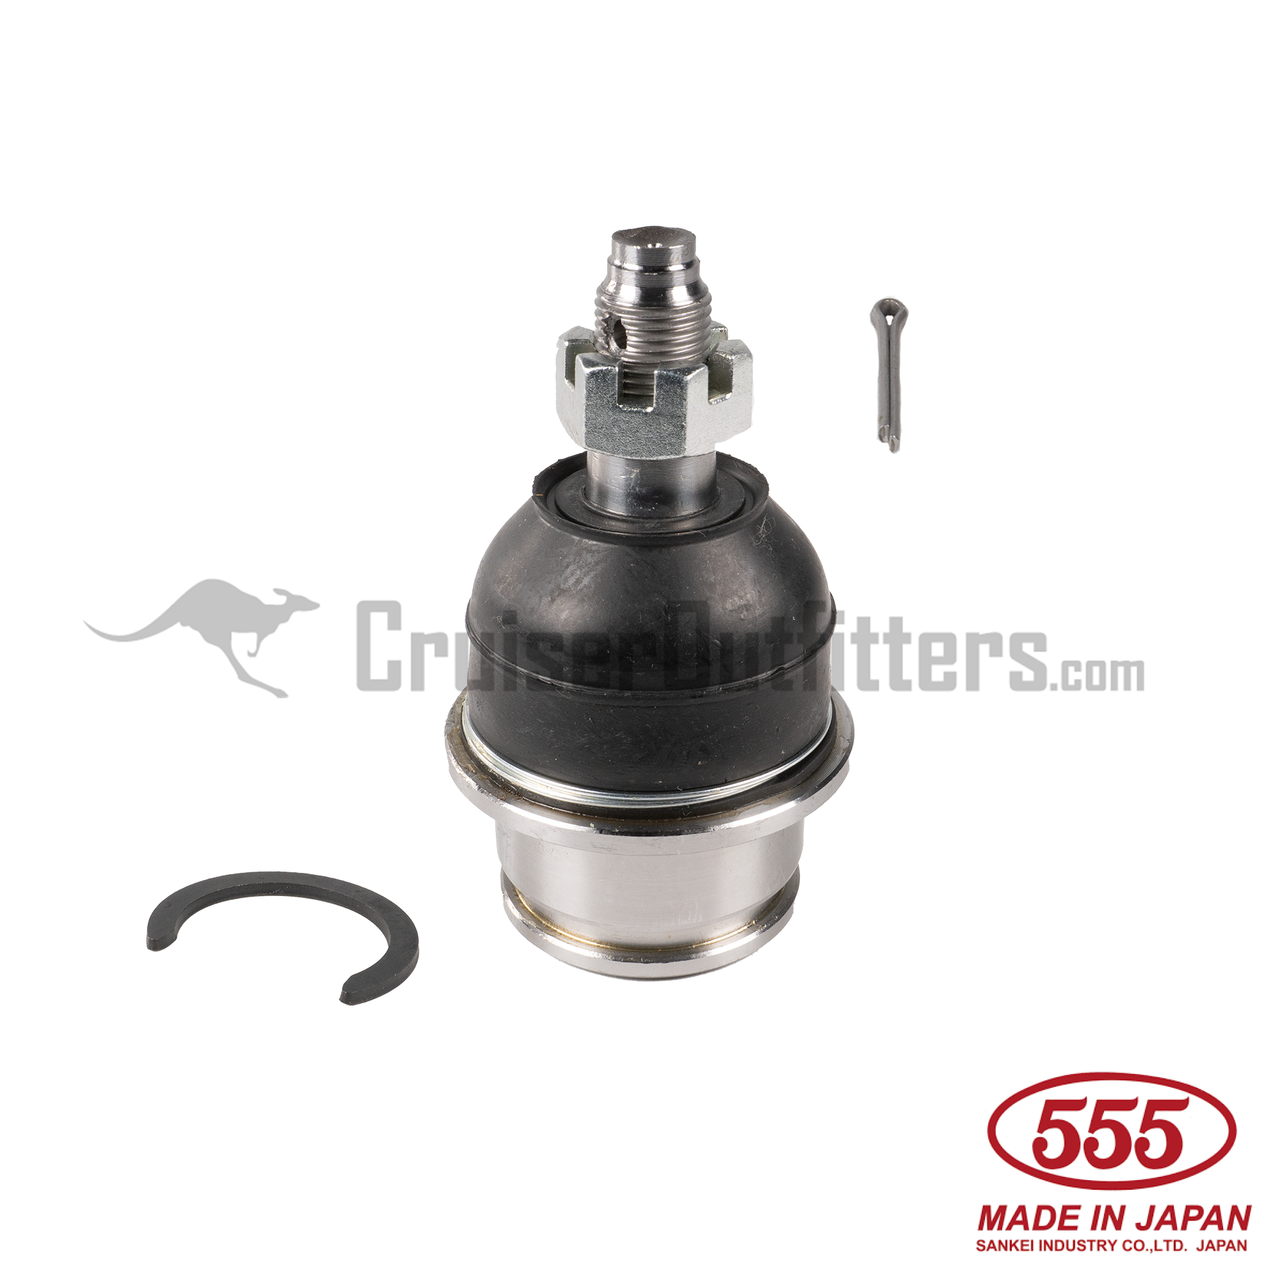 Ball Joint - Fits Lower 2009+ GX460/150 (SUS43336)